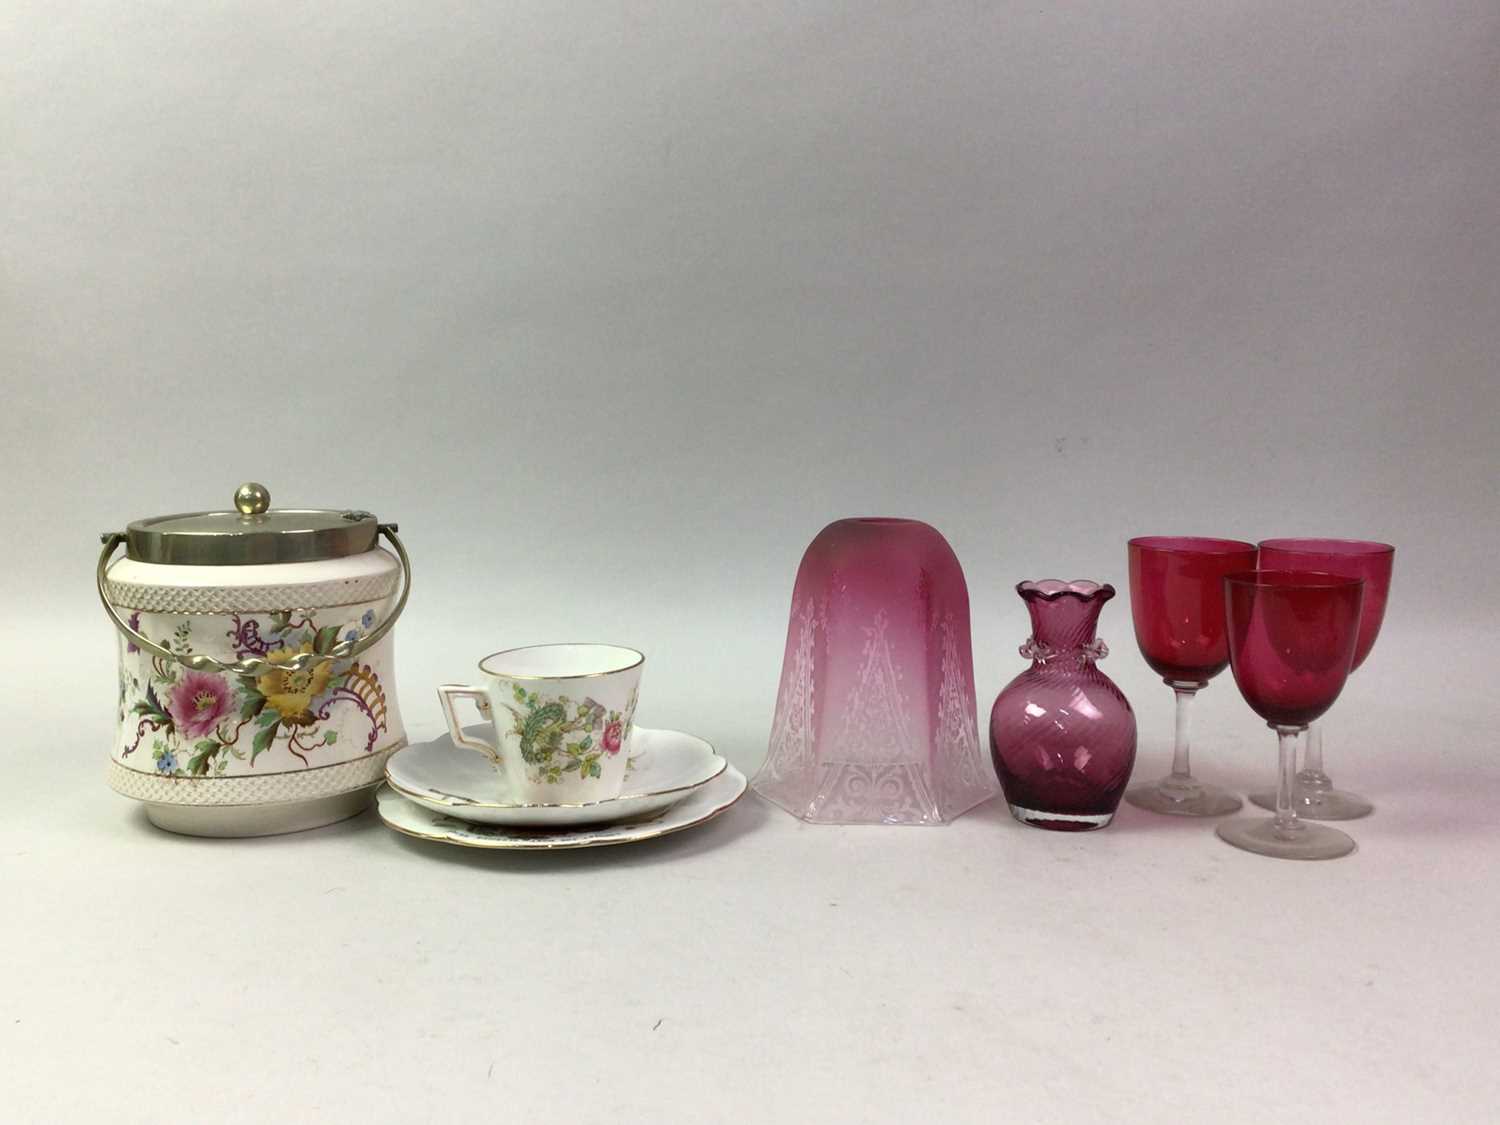 COLLECTION OF CRANBERRY GLASS, ALONG WITH A BISCUIT BARREL AND CRESTED WARE - Image 3 of 3